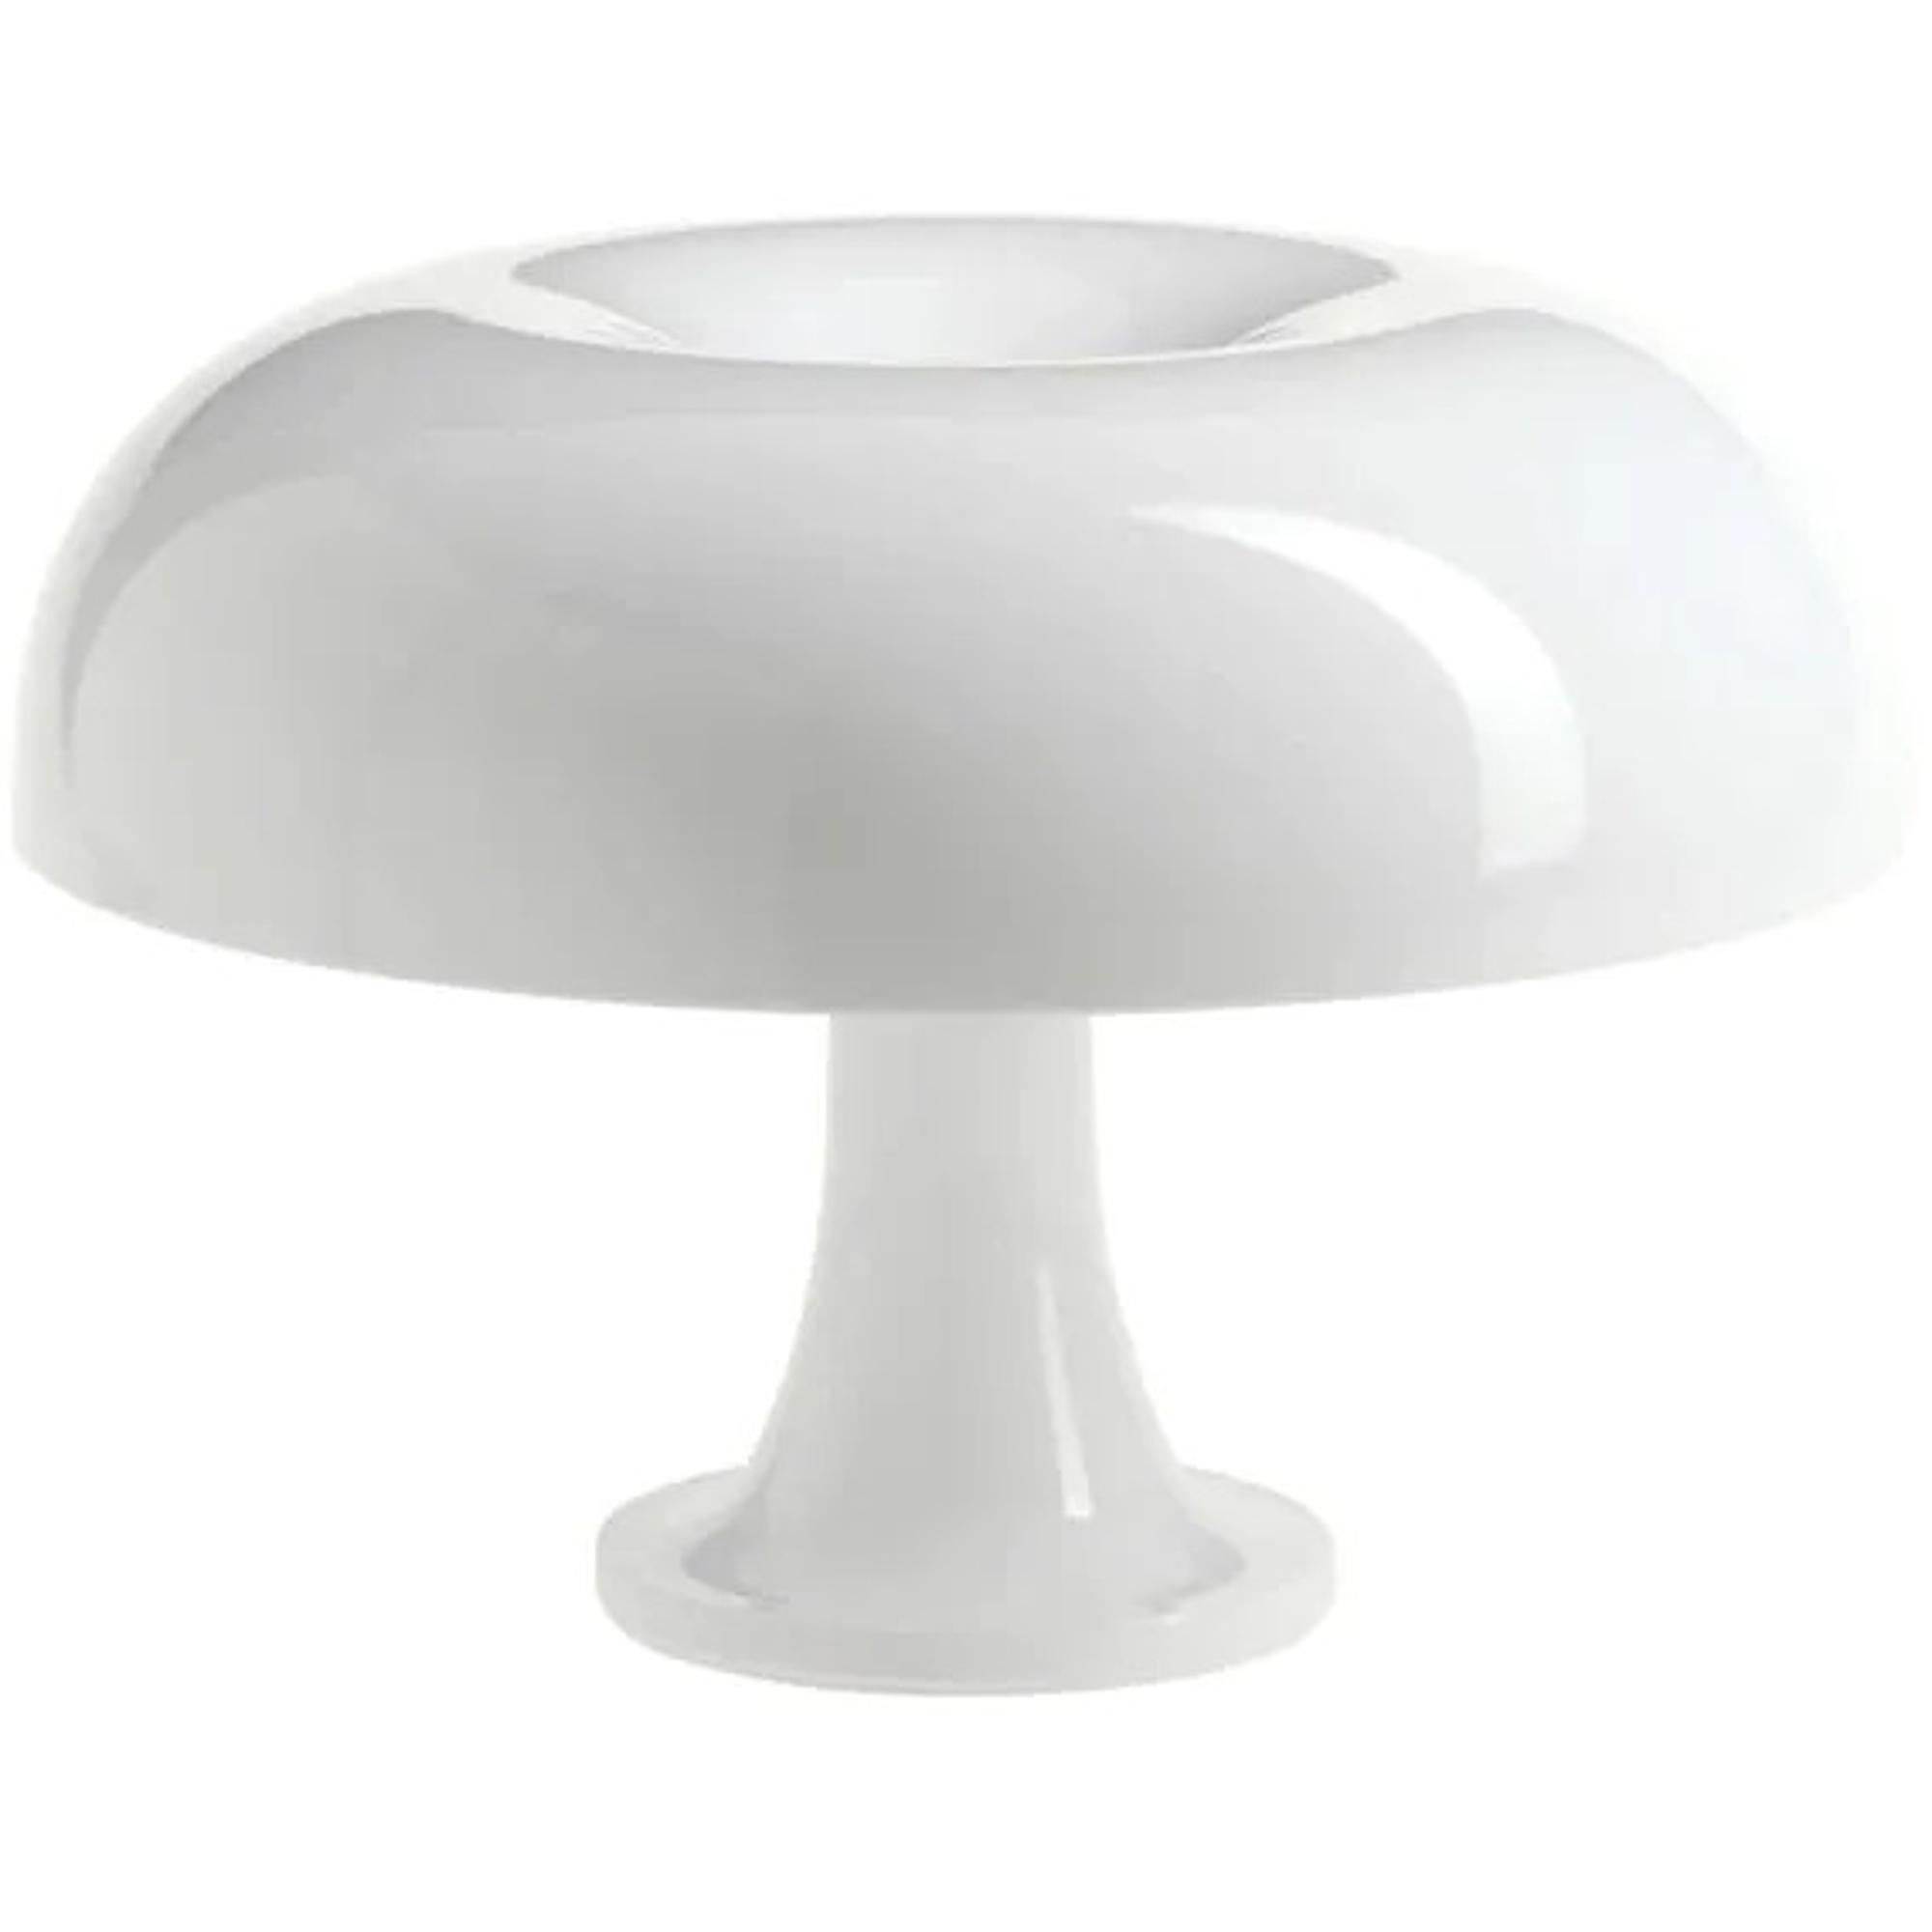 Aannemer draad pot Nessino Table lamp White from Artemide - See large Artemide selection here